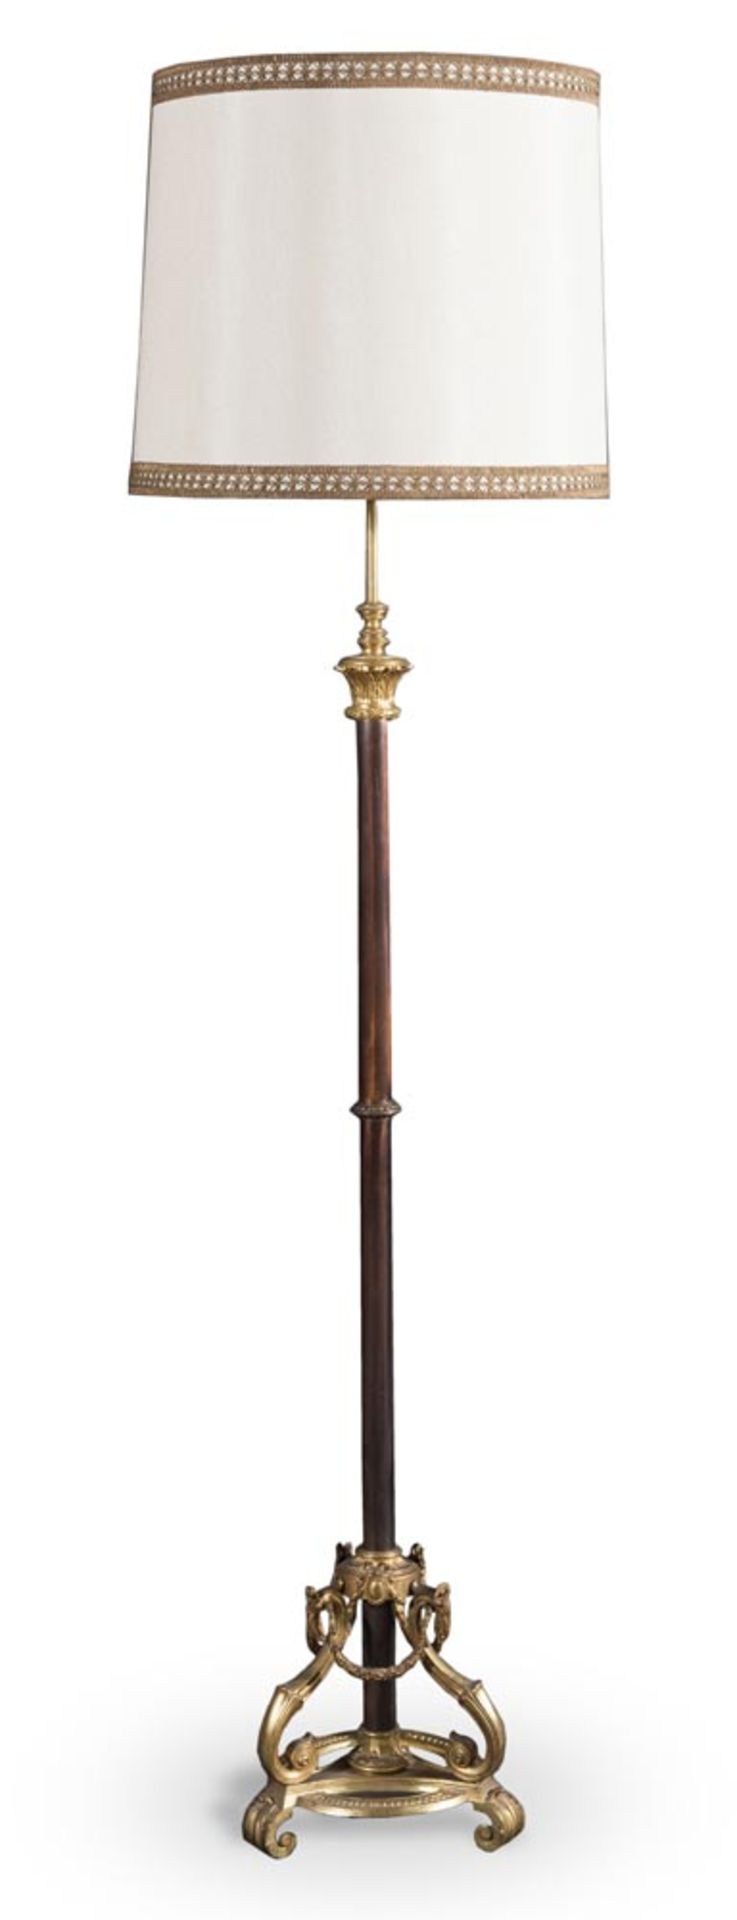 Bronze and gilt metal floor lamp, early 20th Century.